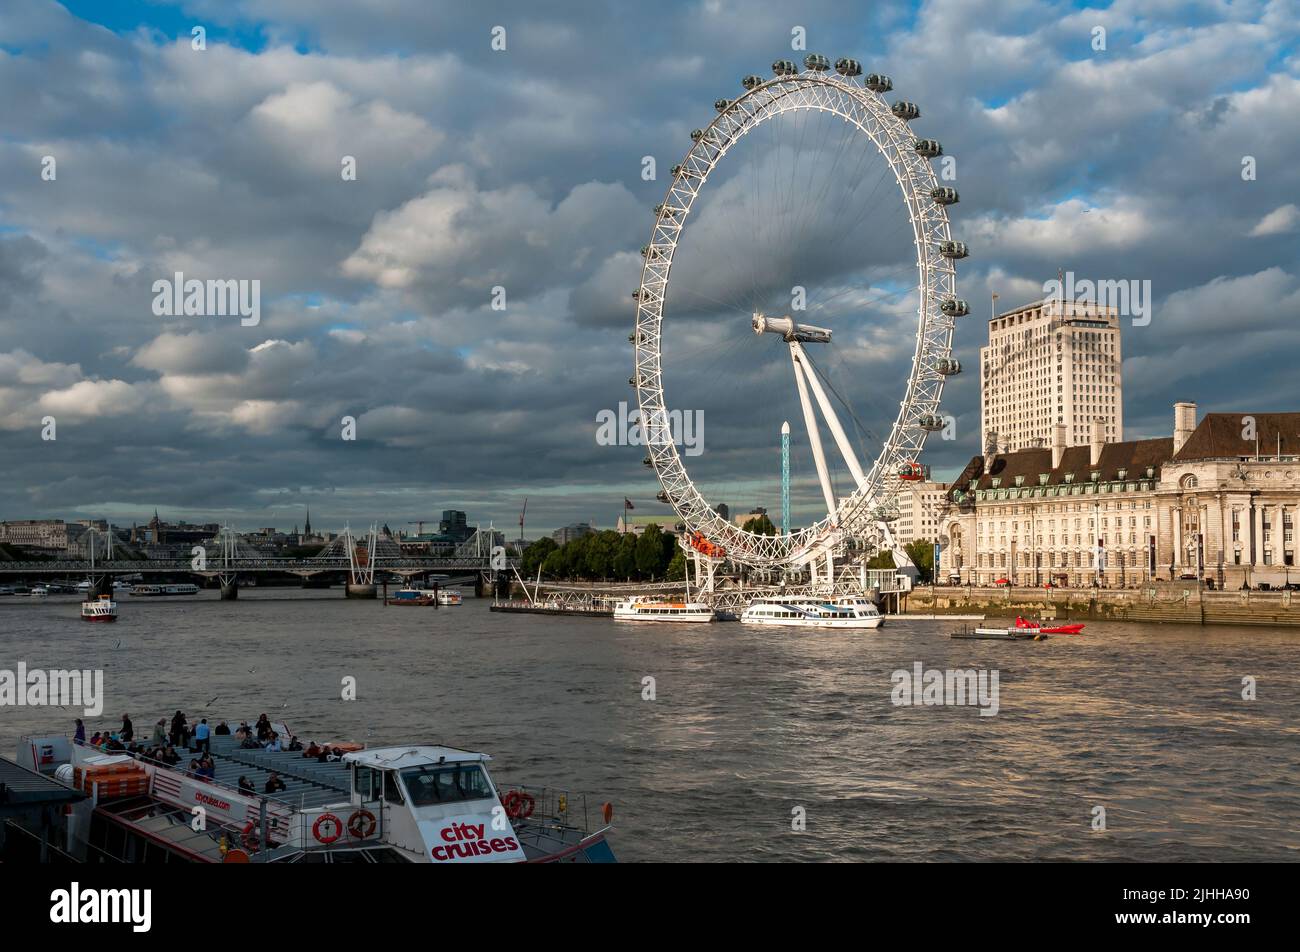 London, England, United Kingdom - September 18, 2013: View of the London Eye at sunset, is a cantilevered observation wheel . Stock Photo